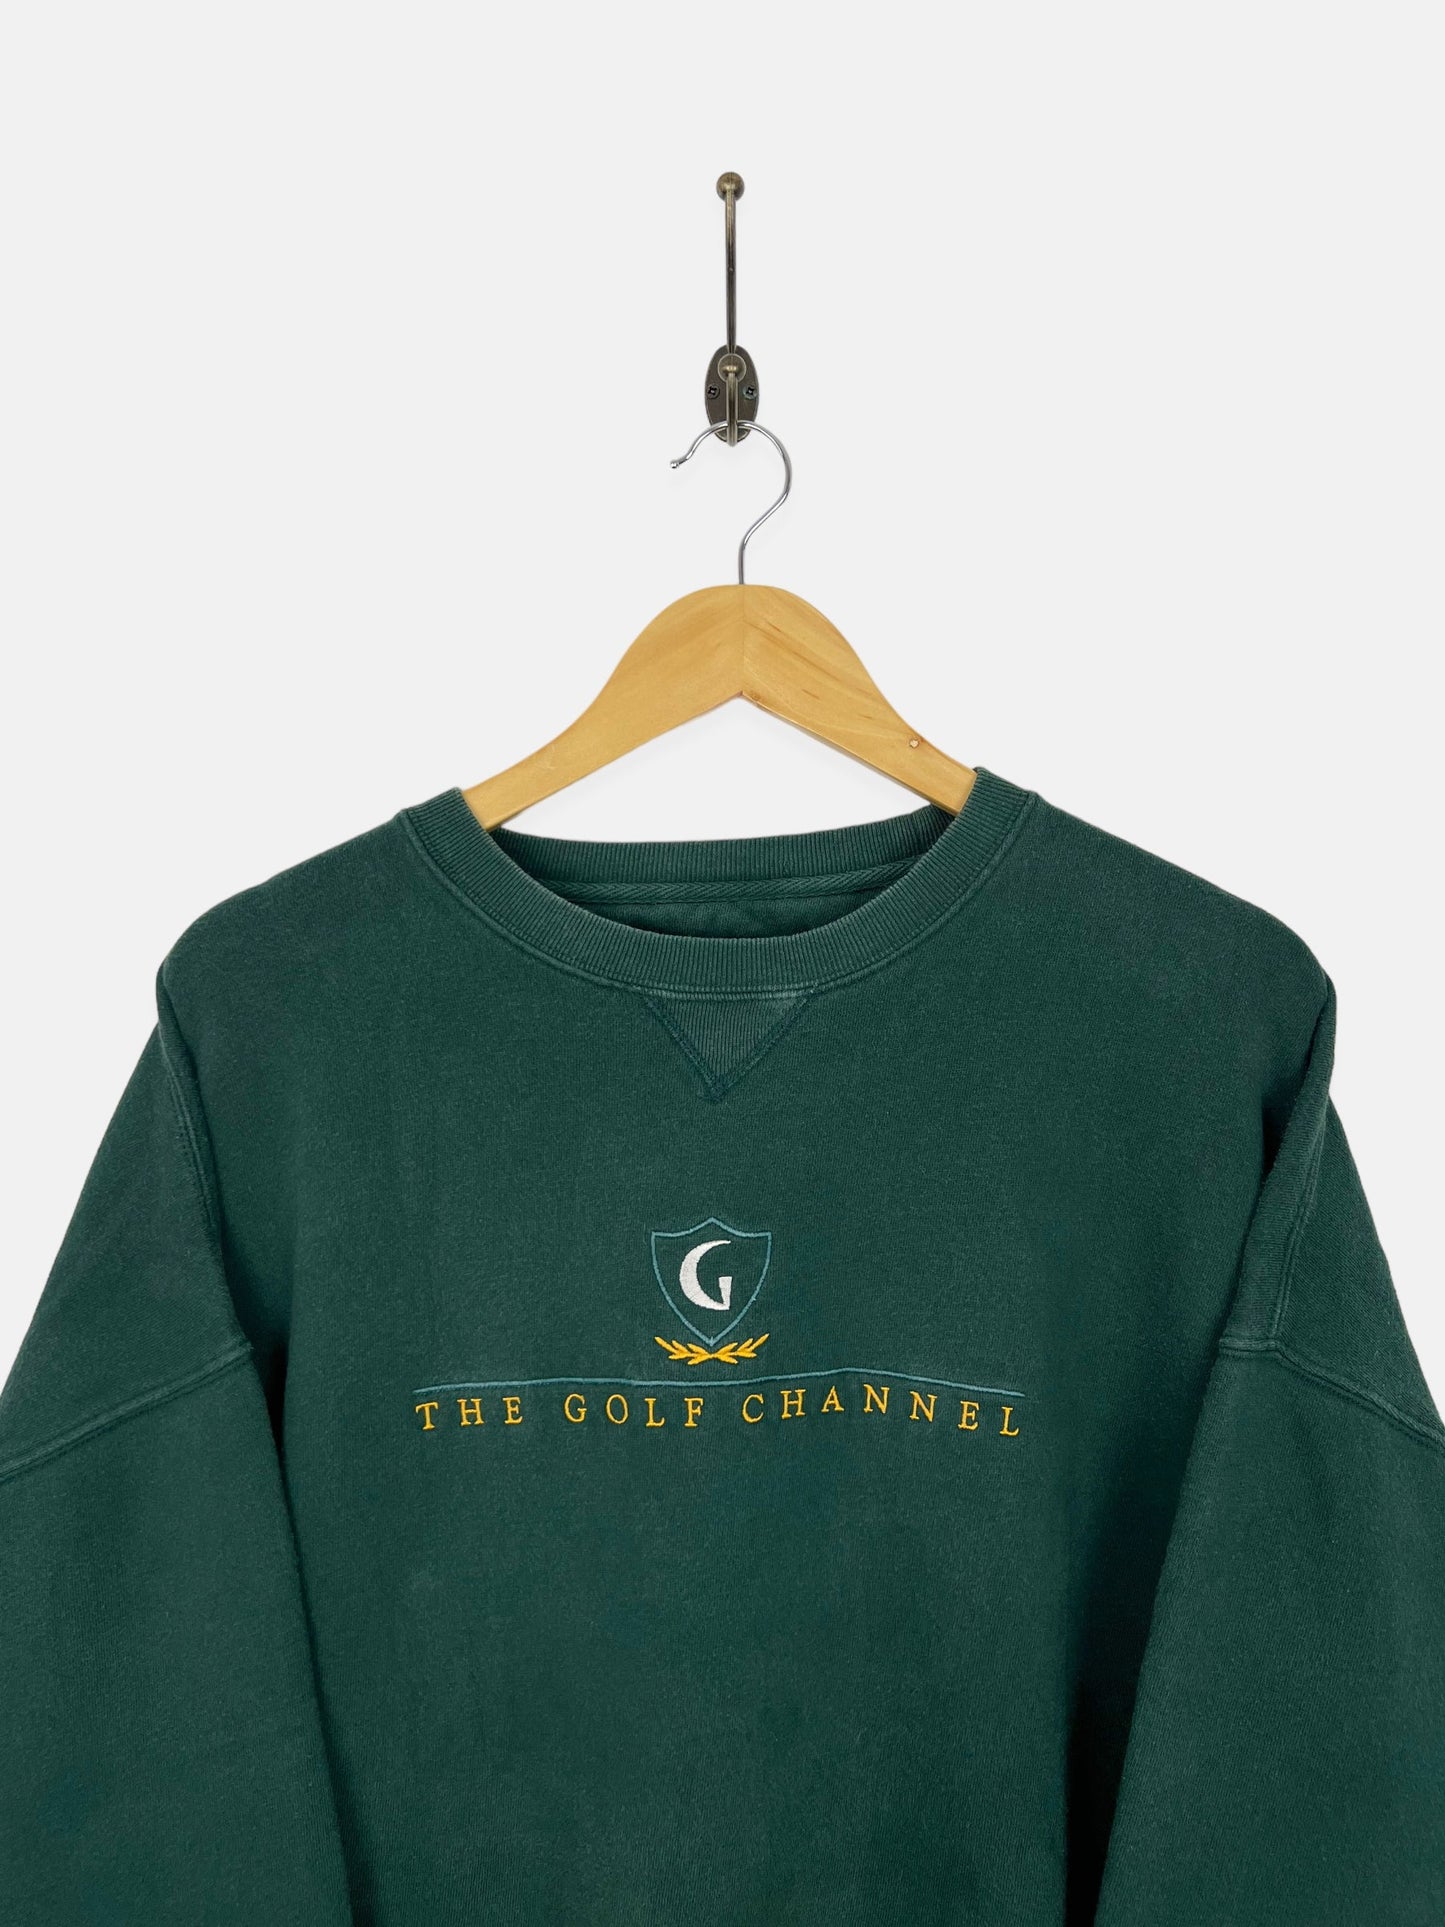 90's The Golf Channel Embroidered Vintage Sweatshirt Size 2XL